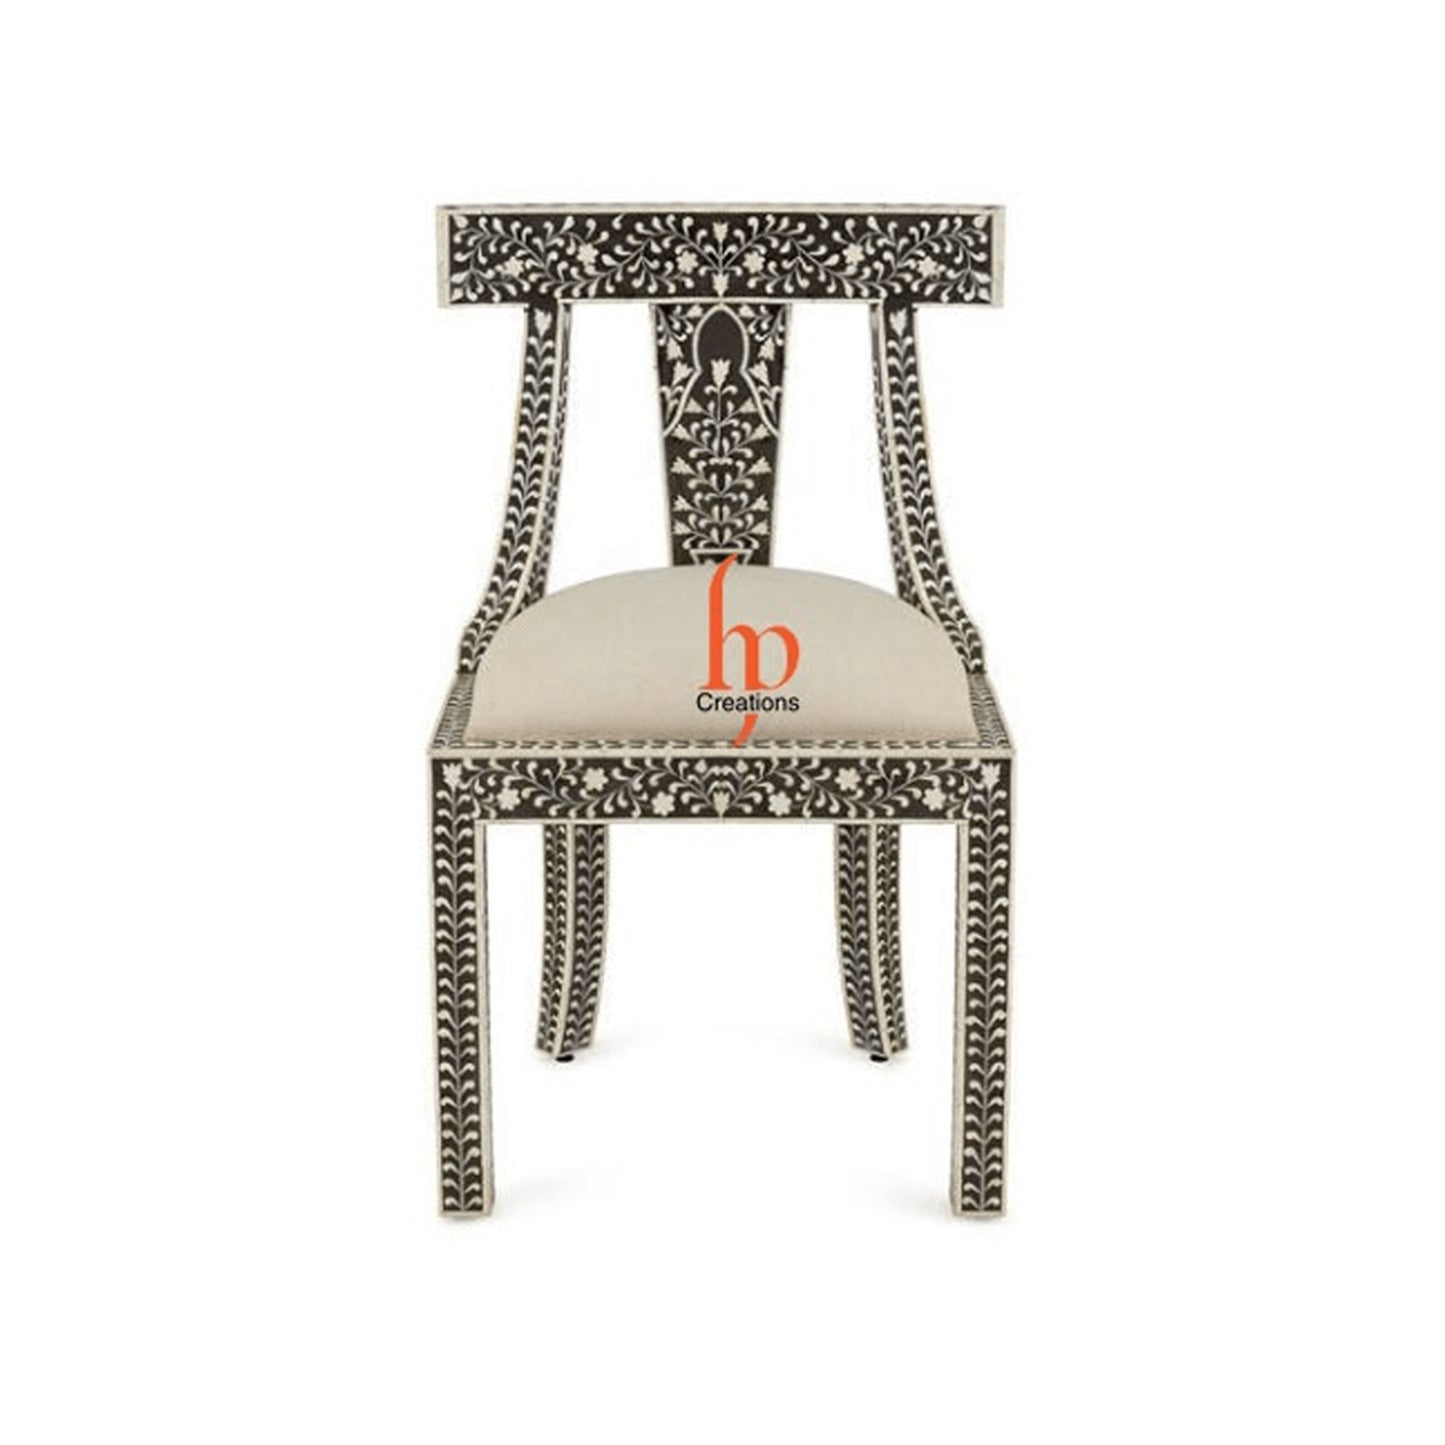 Personalized Handmade Bone Inlay Chair Beautiful Floral Design Antique Chair Best For Home Decor